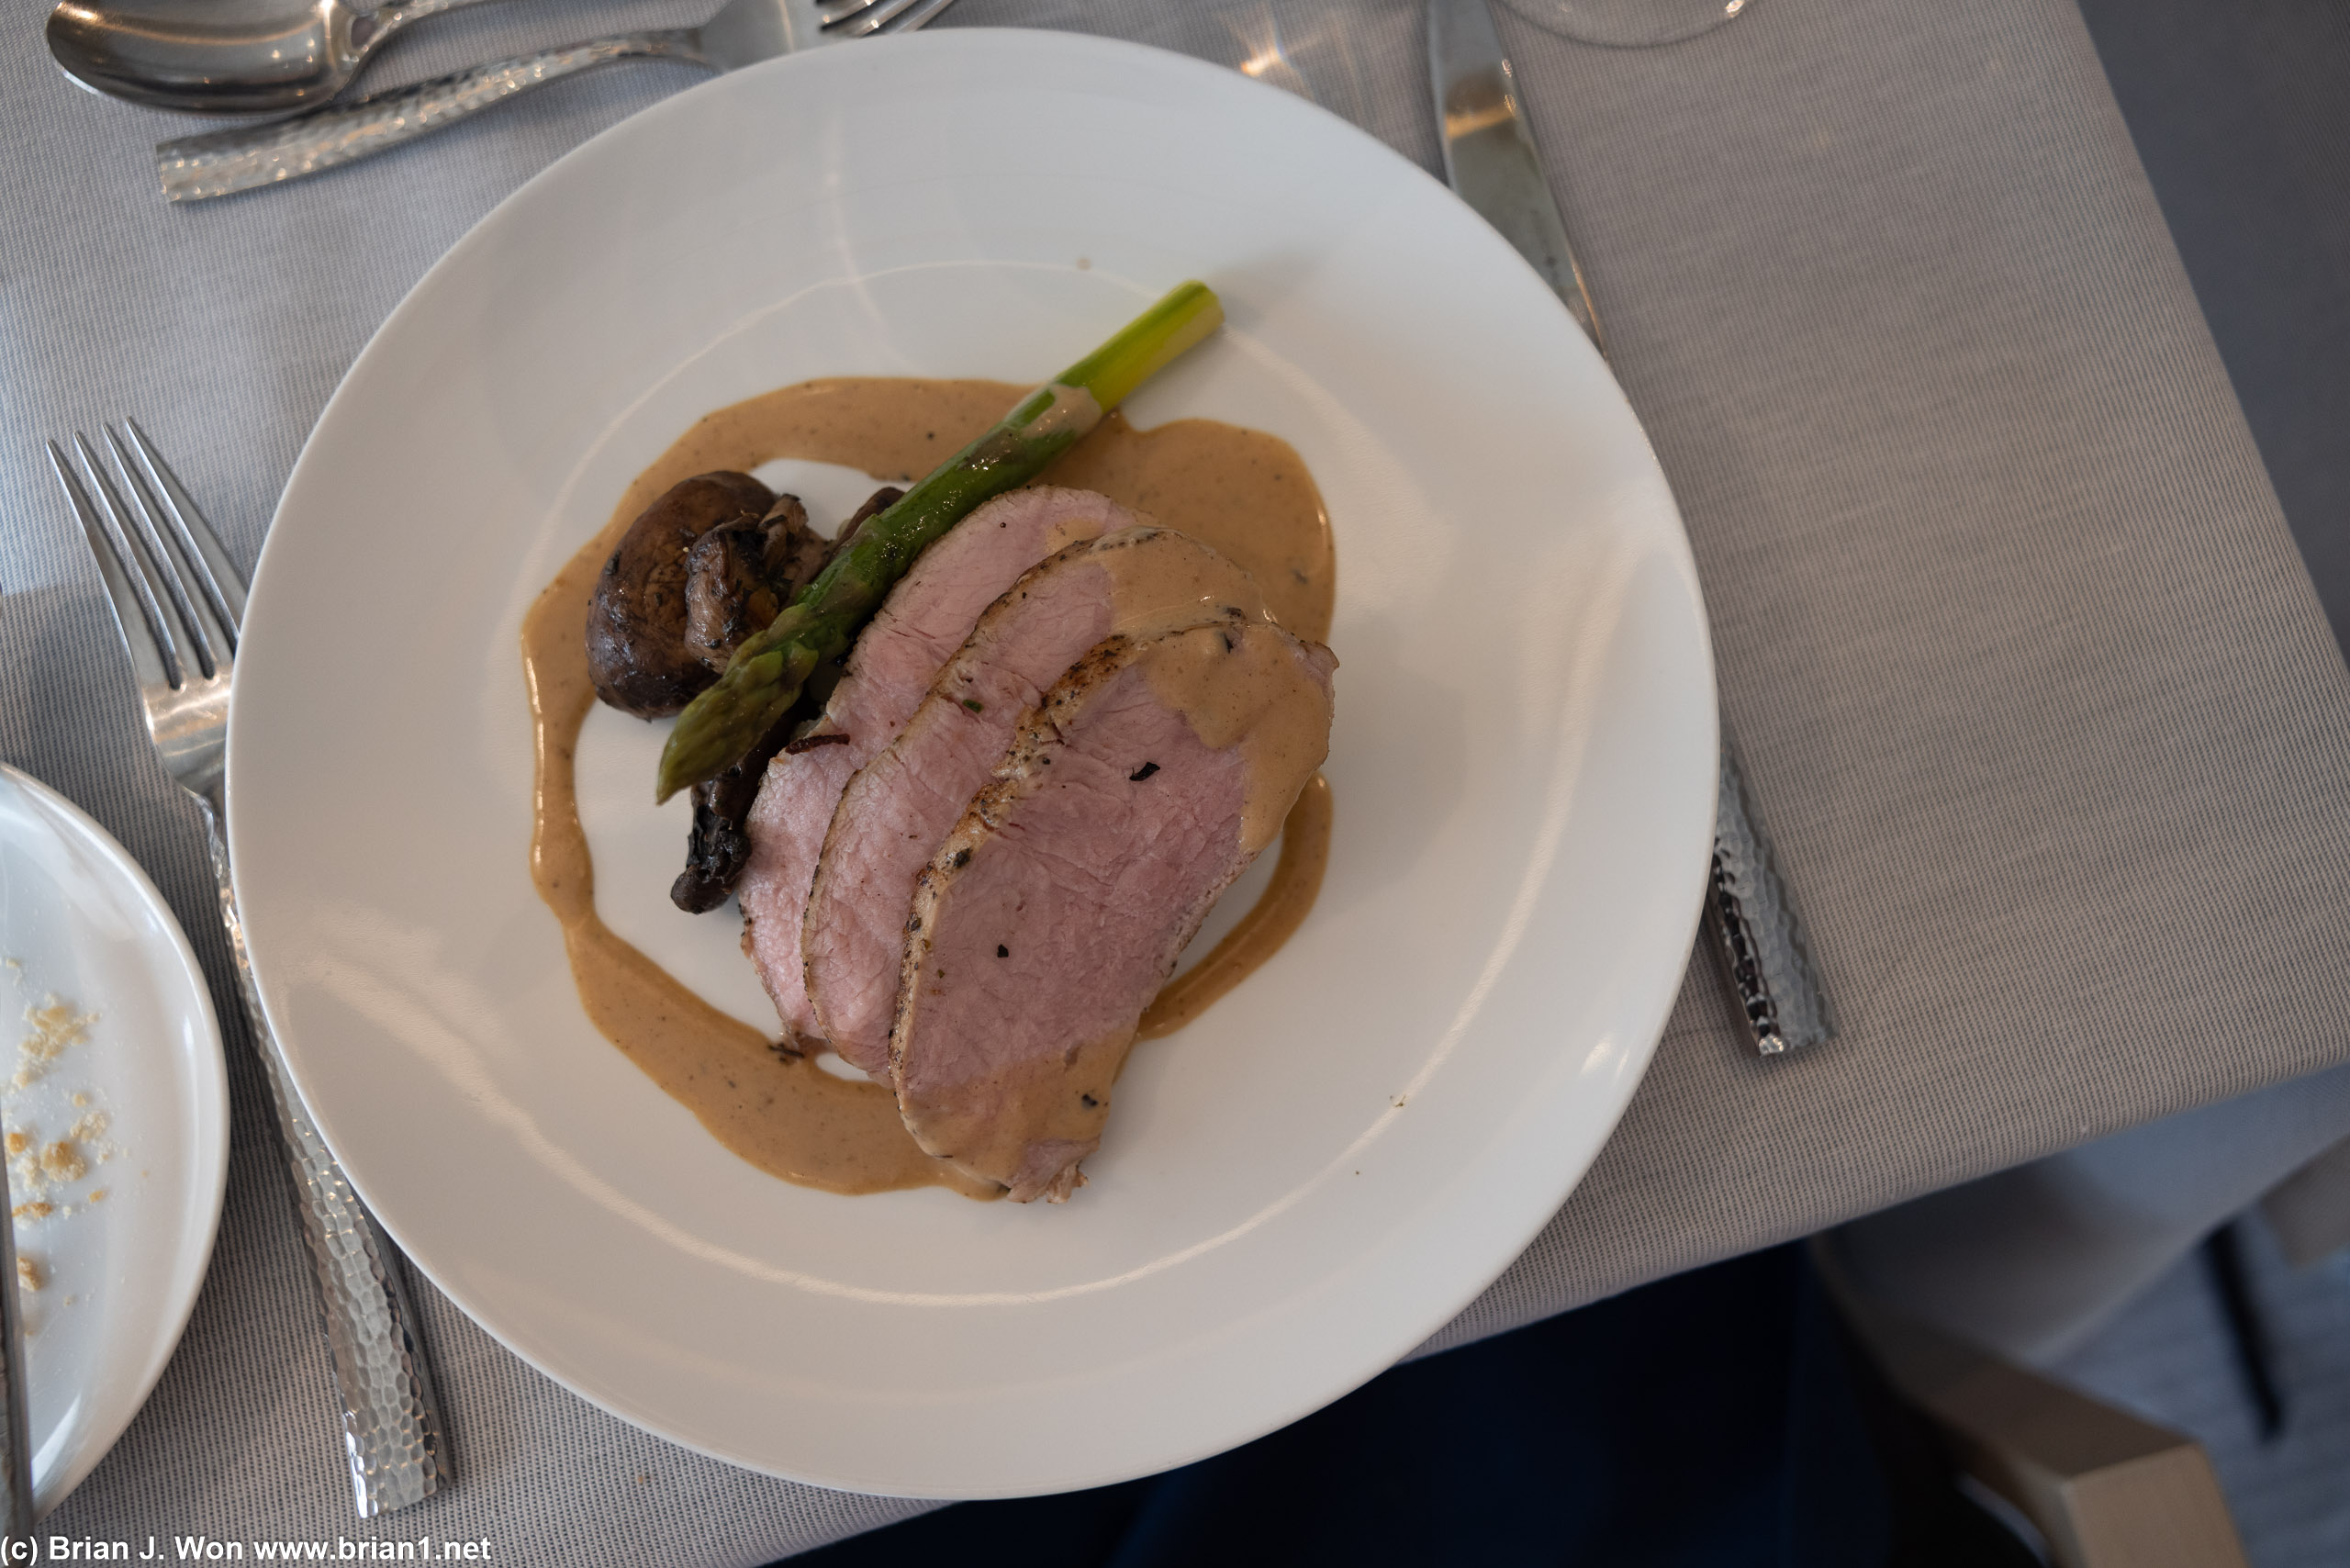 Veal loin was pretty good.